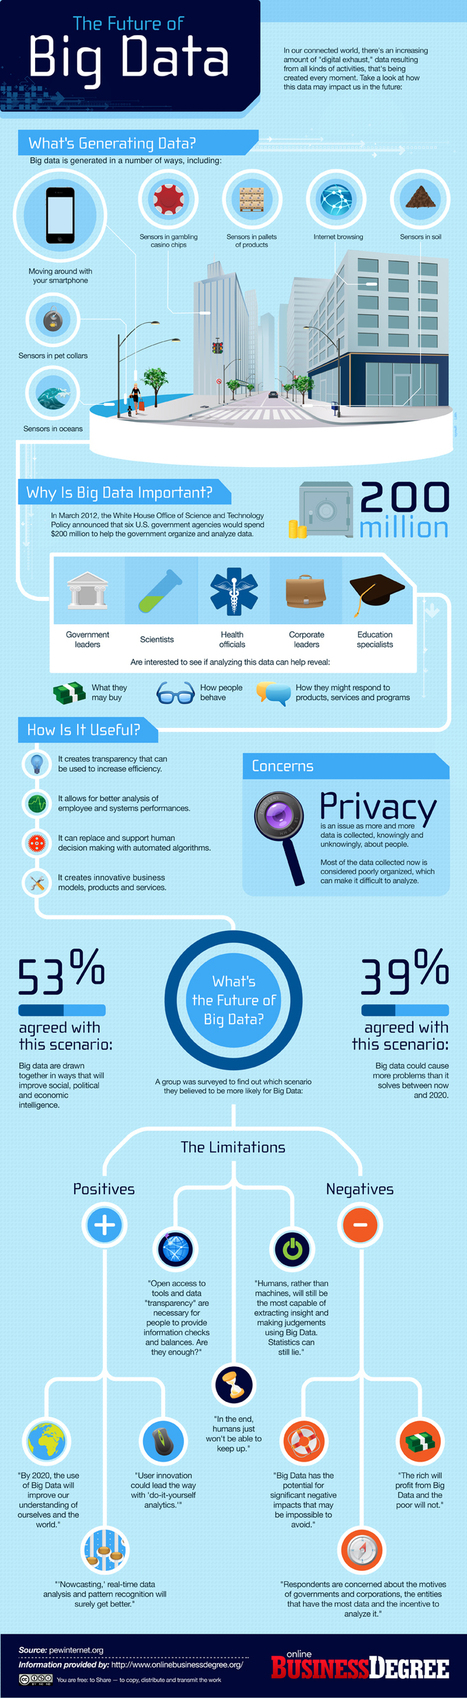 Infographic: the Future of Big Data | :: The 4th Era :: | Scoop.it